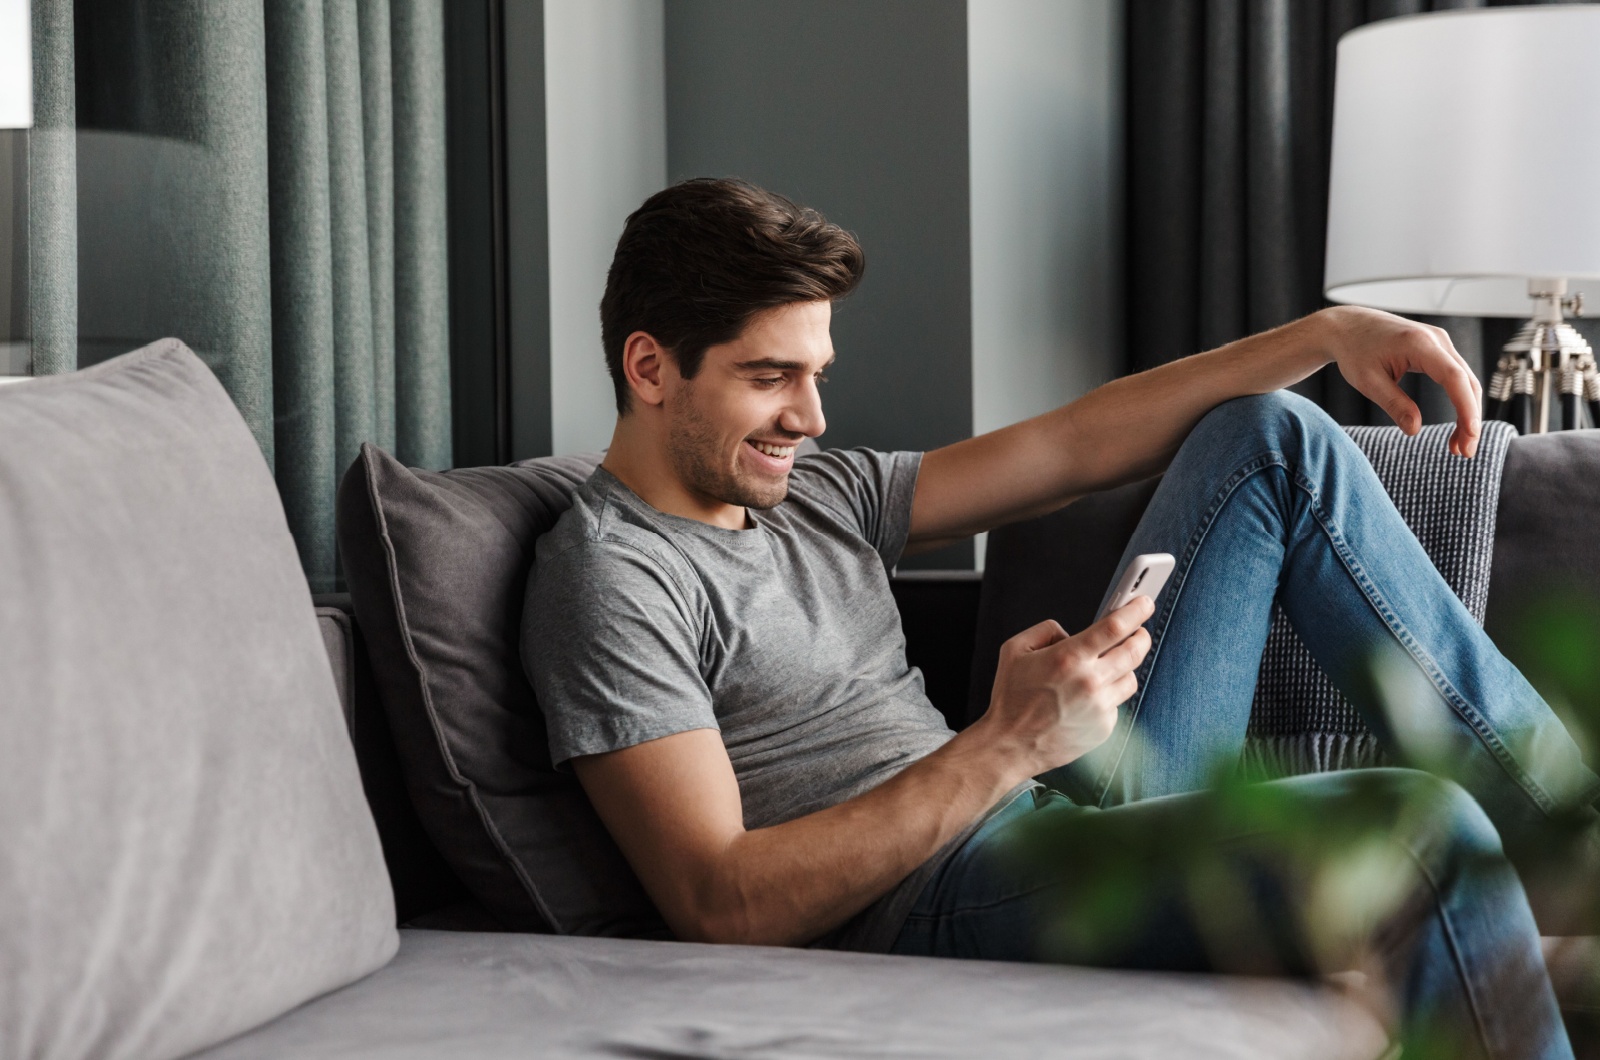 man sitting on couch texting